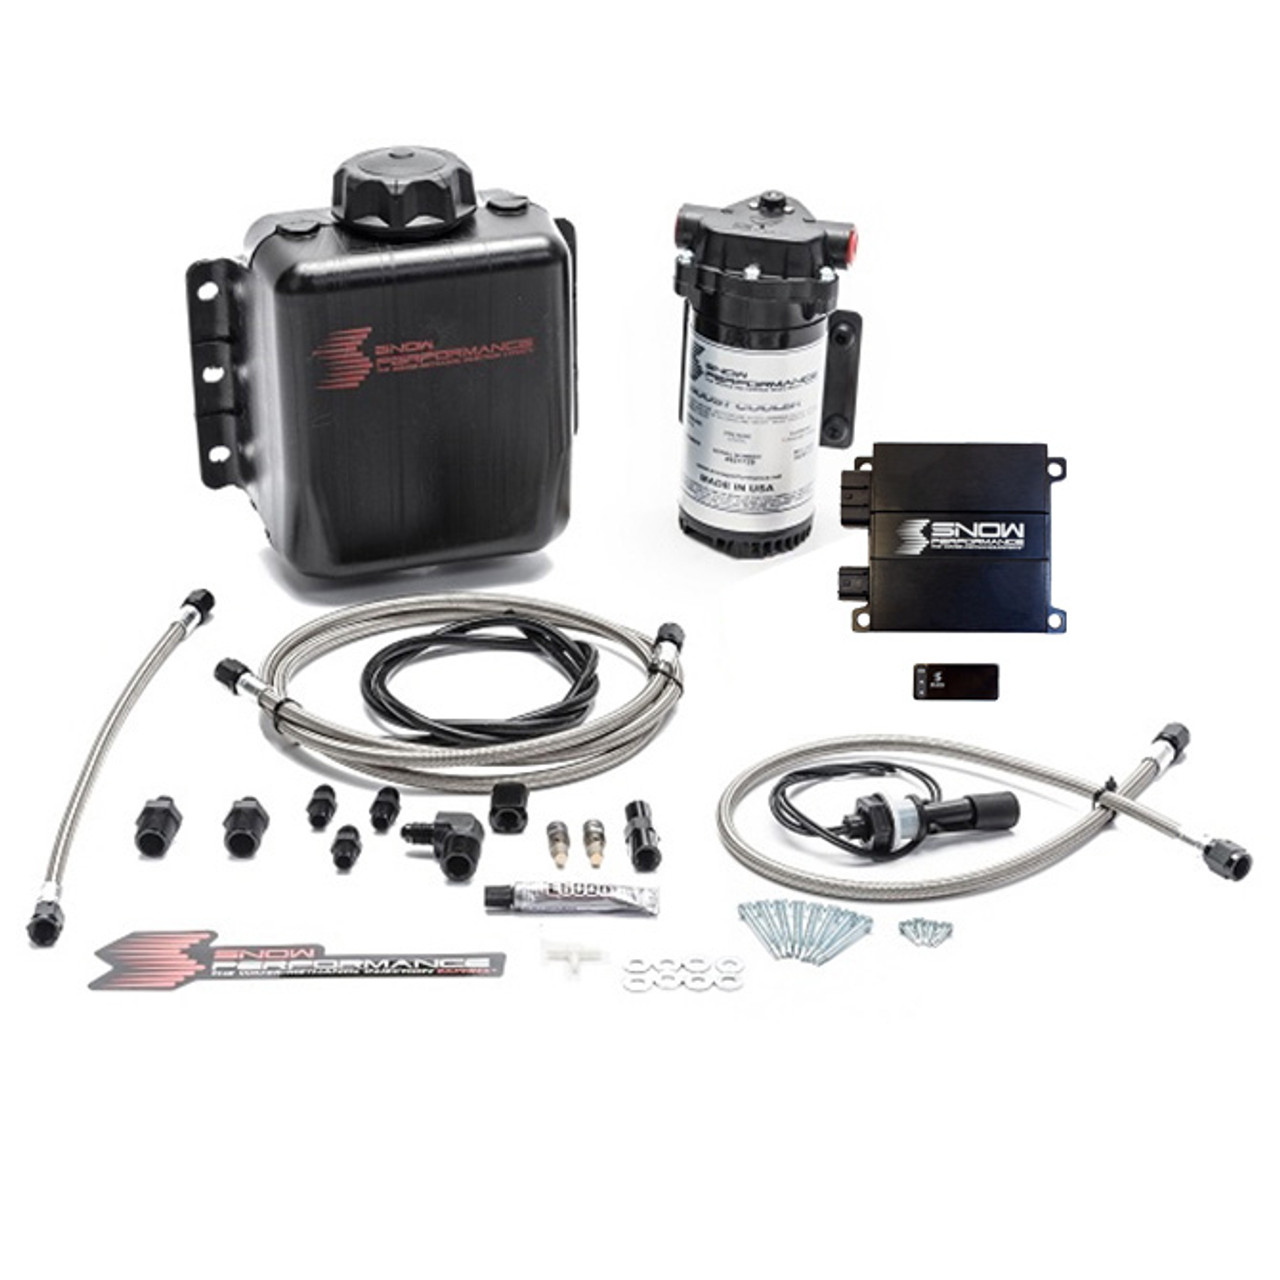 Snow Perfromance  Stage 2 Boost Cooler (Progressive Water-Methanol Injection Kit For Forced Induction Gasoline Engines) - Braided Lines